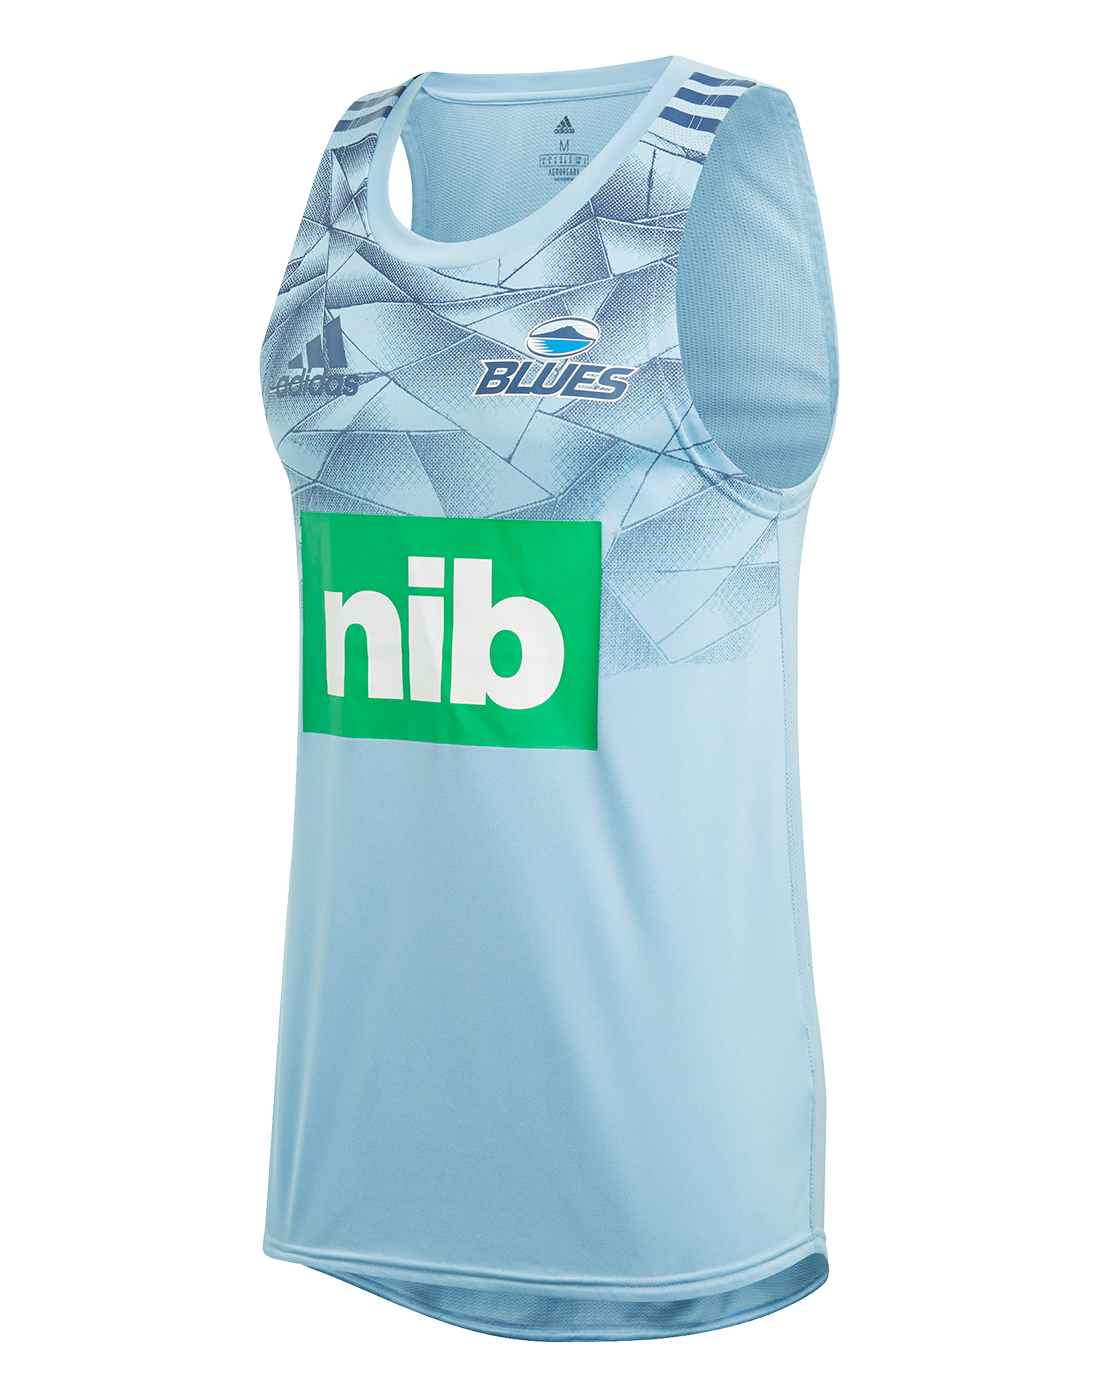 adidas Adult Blues Singlet 2020/2021 - Blue | Life Style Sports IE